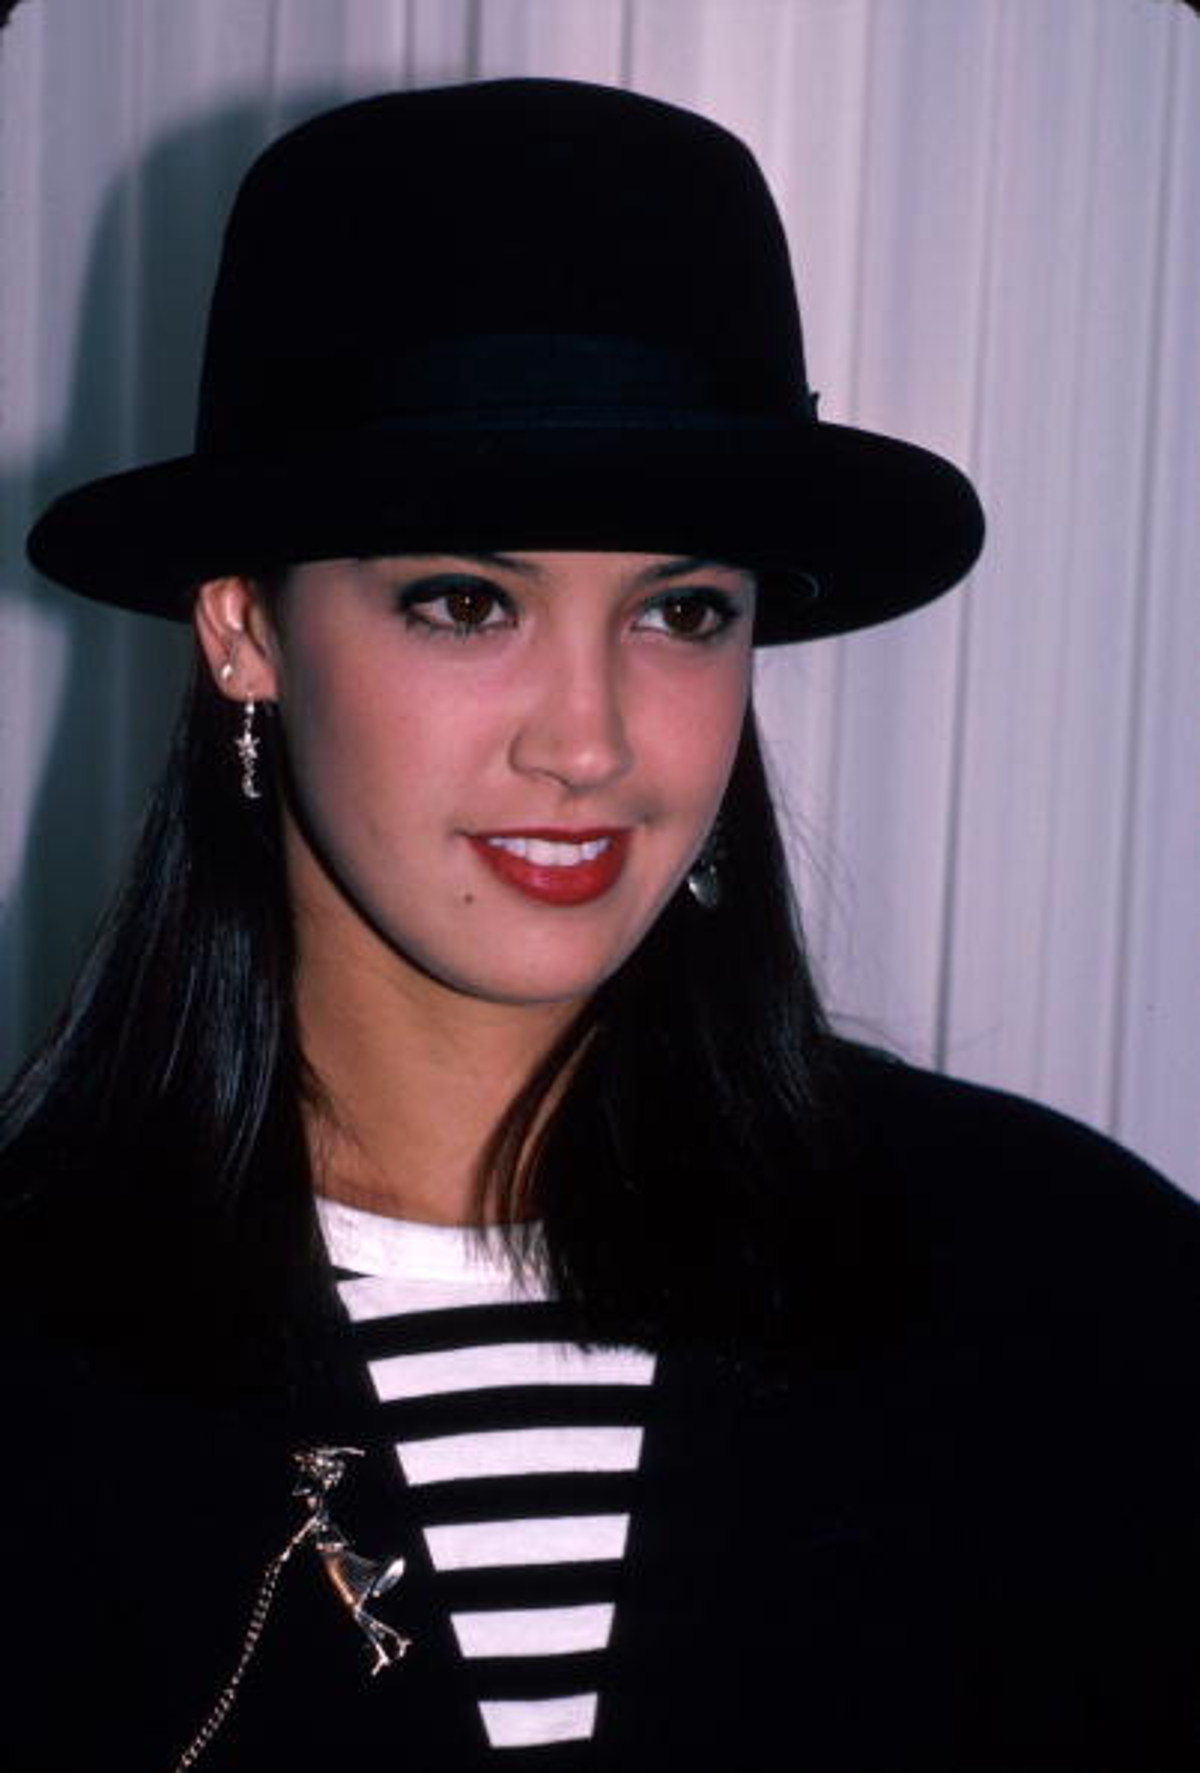 PHOEBE CATES F45KkuxXAAAJF0z?format=jpg&name=large